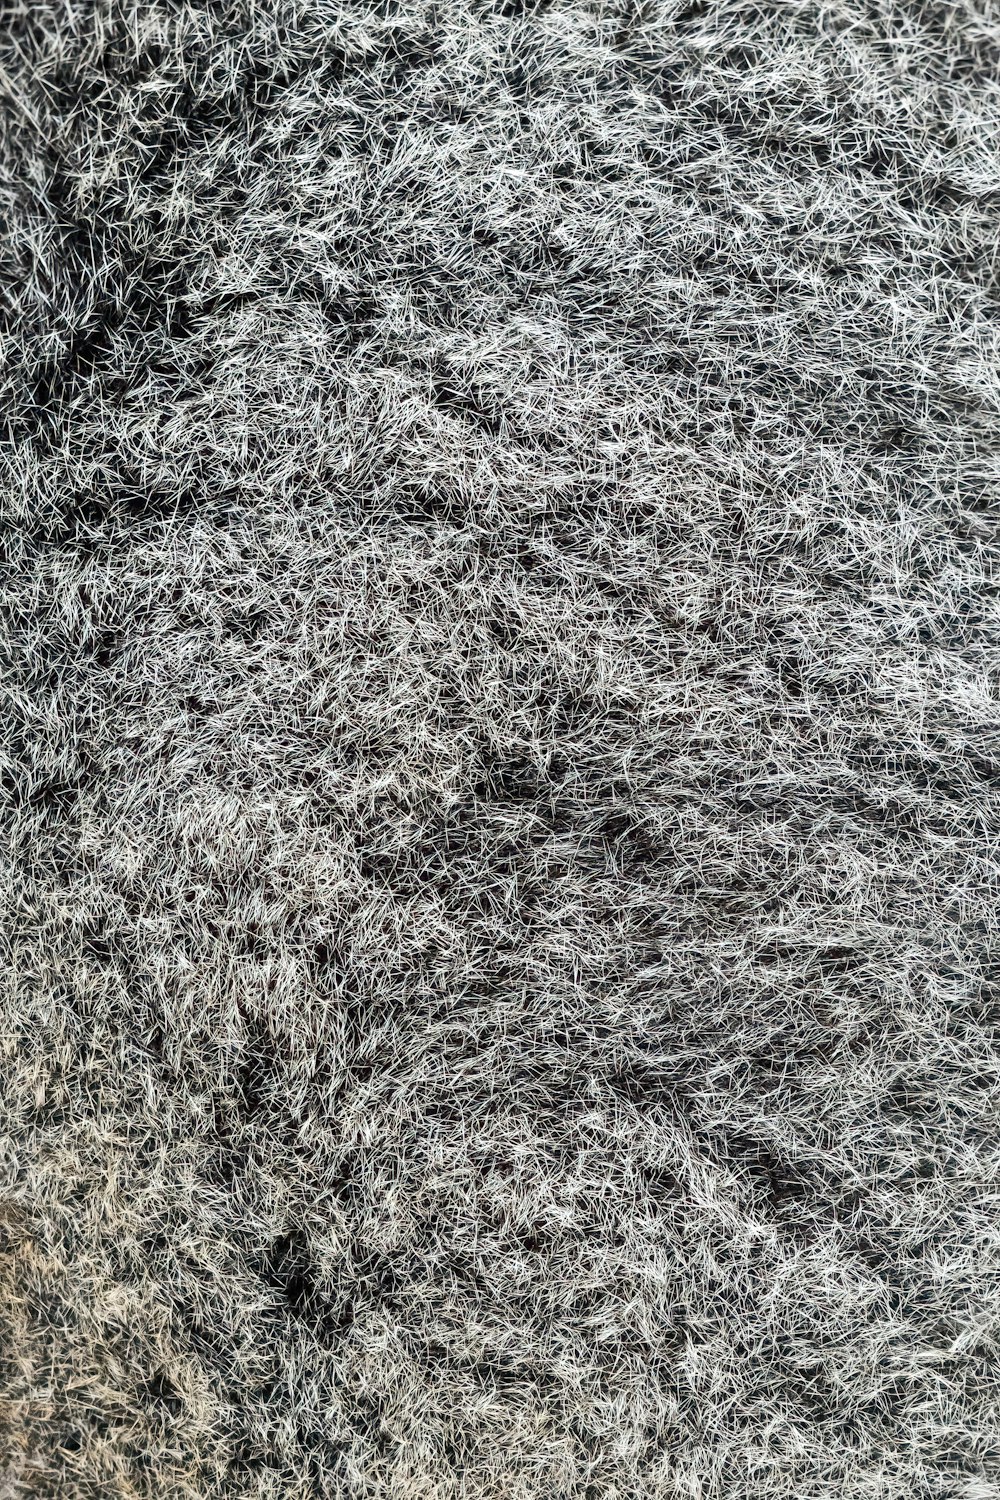 a close up of a black and white rug